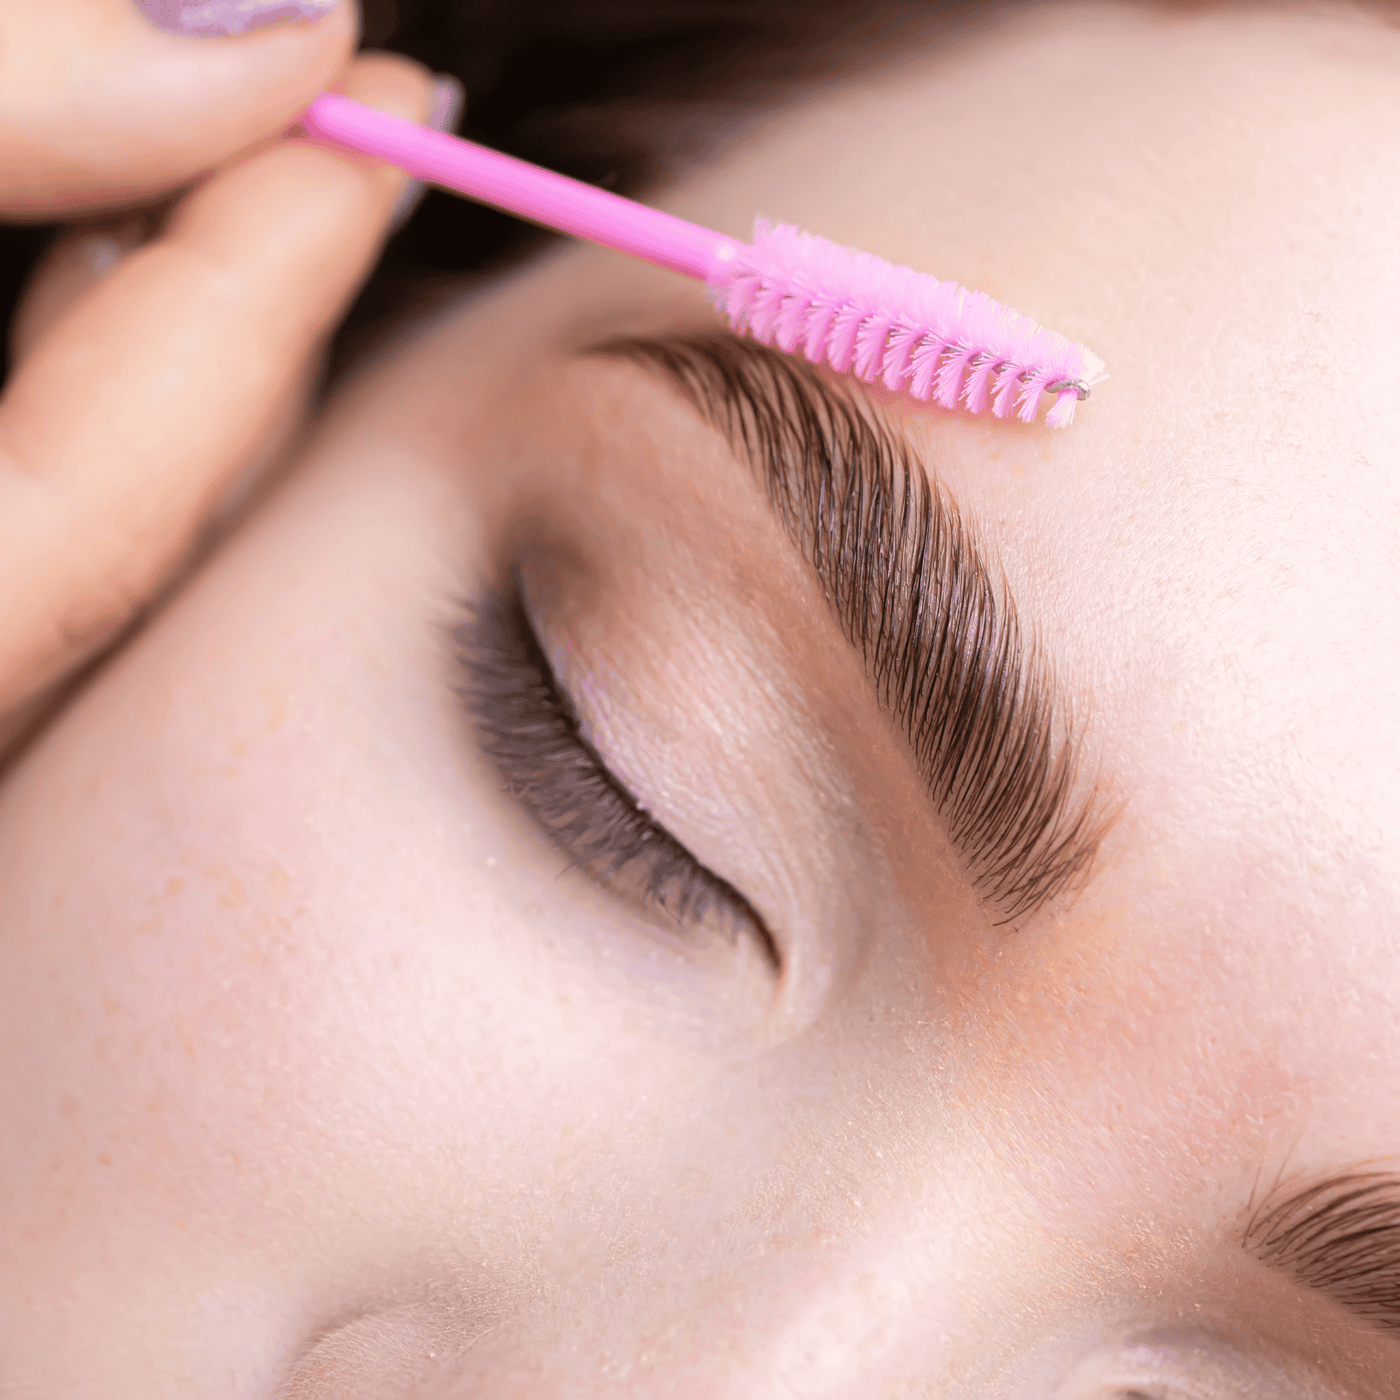 Beginners Brow Lamination, Waxing and Tinting Course - East Sussex Venue - The London Brow Company